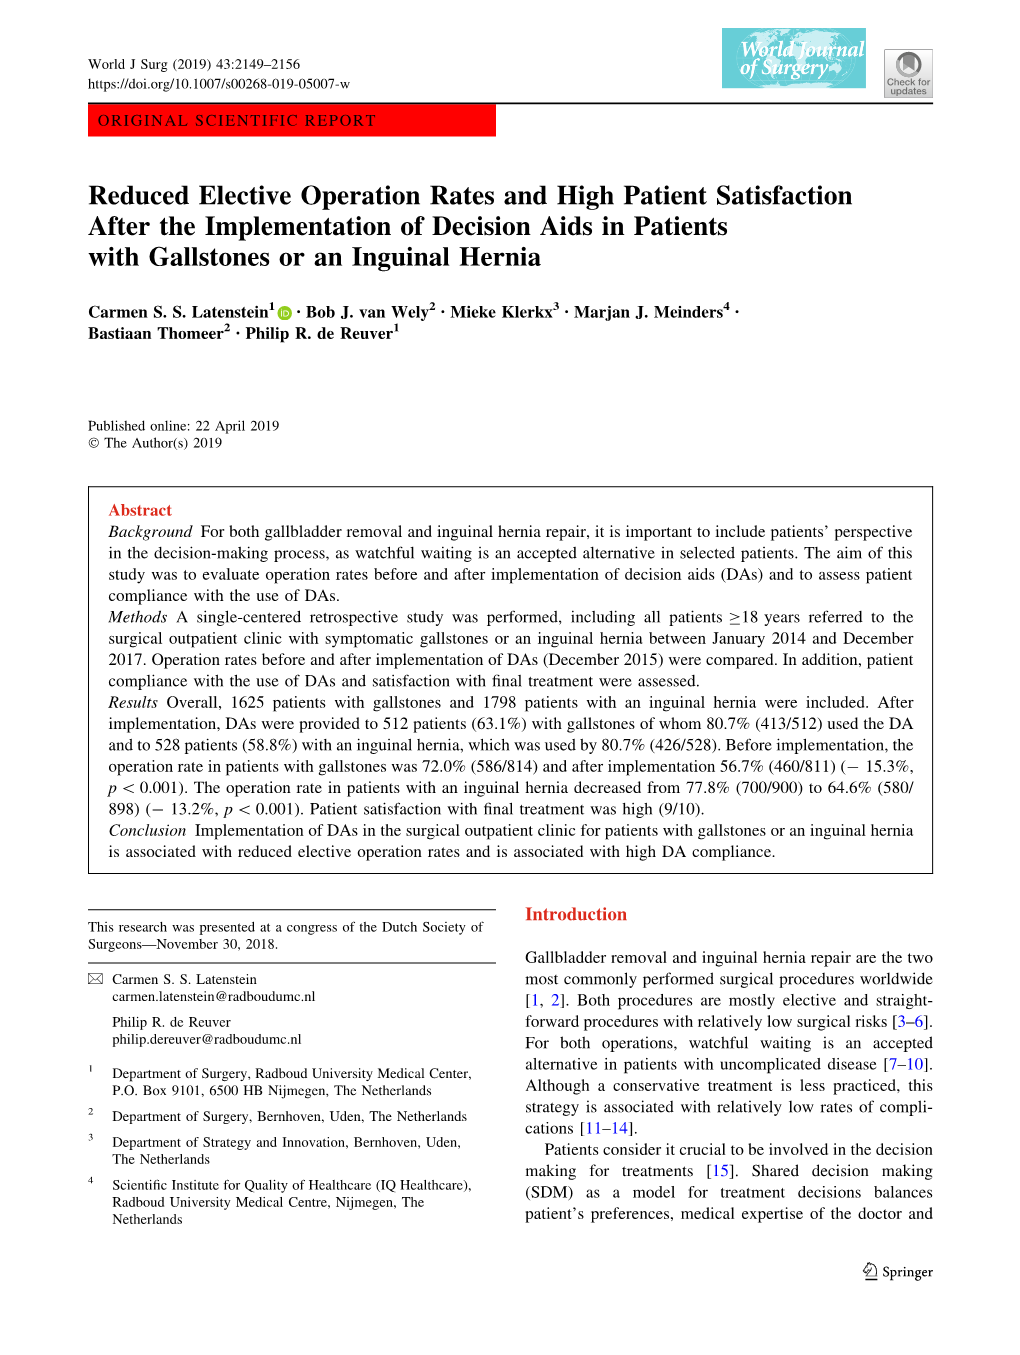 Reduced Elective Operation Rates and High Patient Satisfaction After the Implementation of Decision Aids in Patients with Gallstones Or an Inguinal Hernia